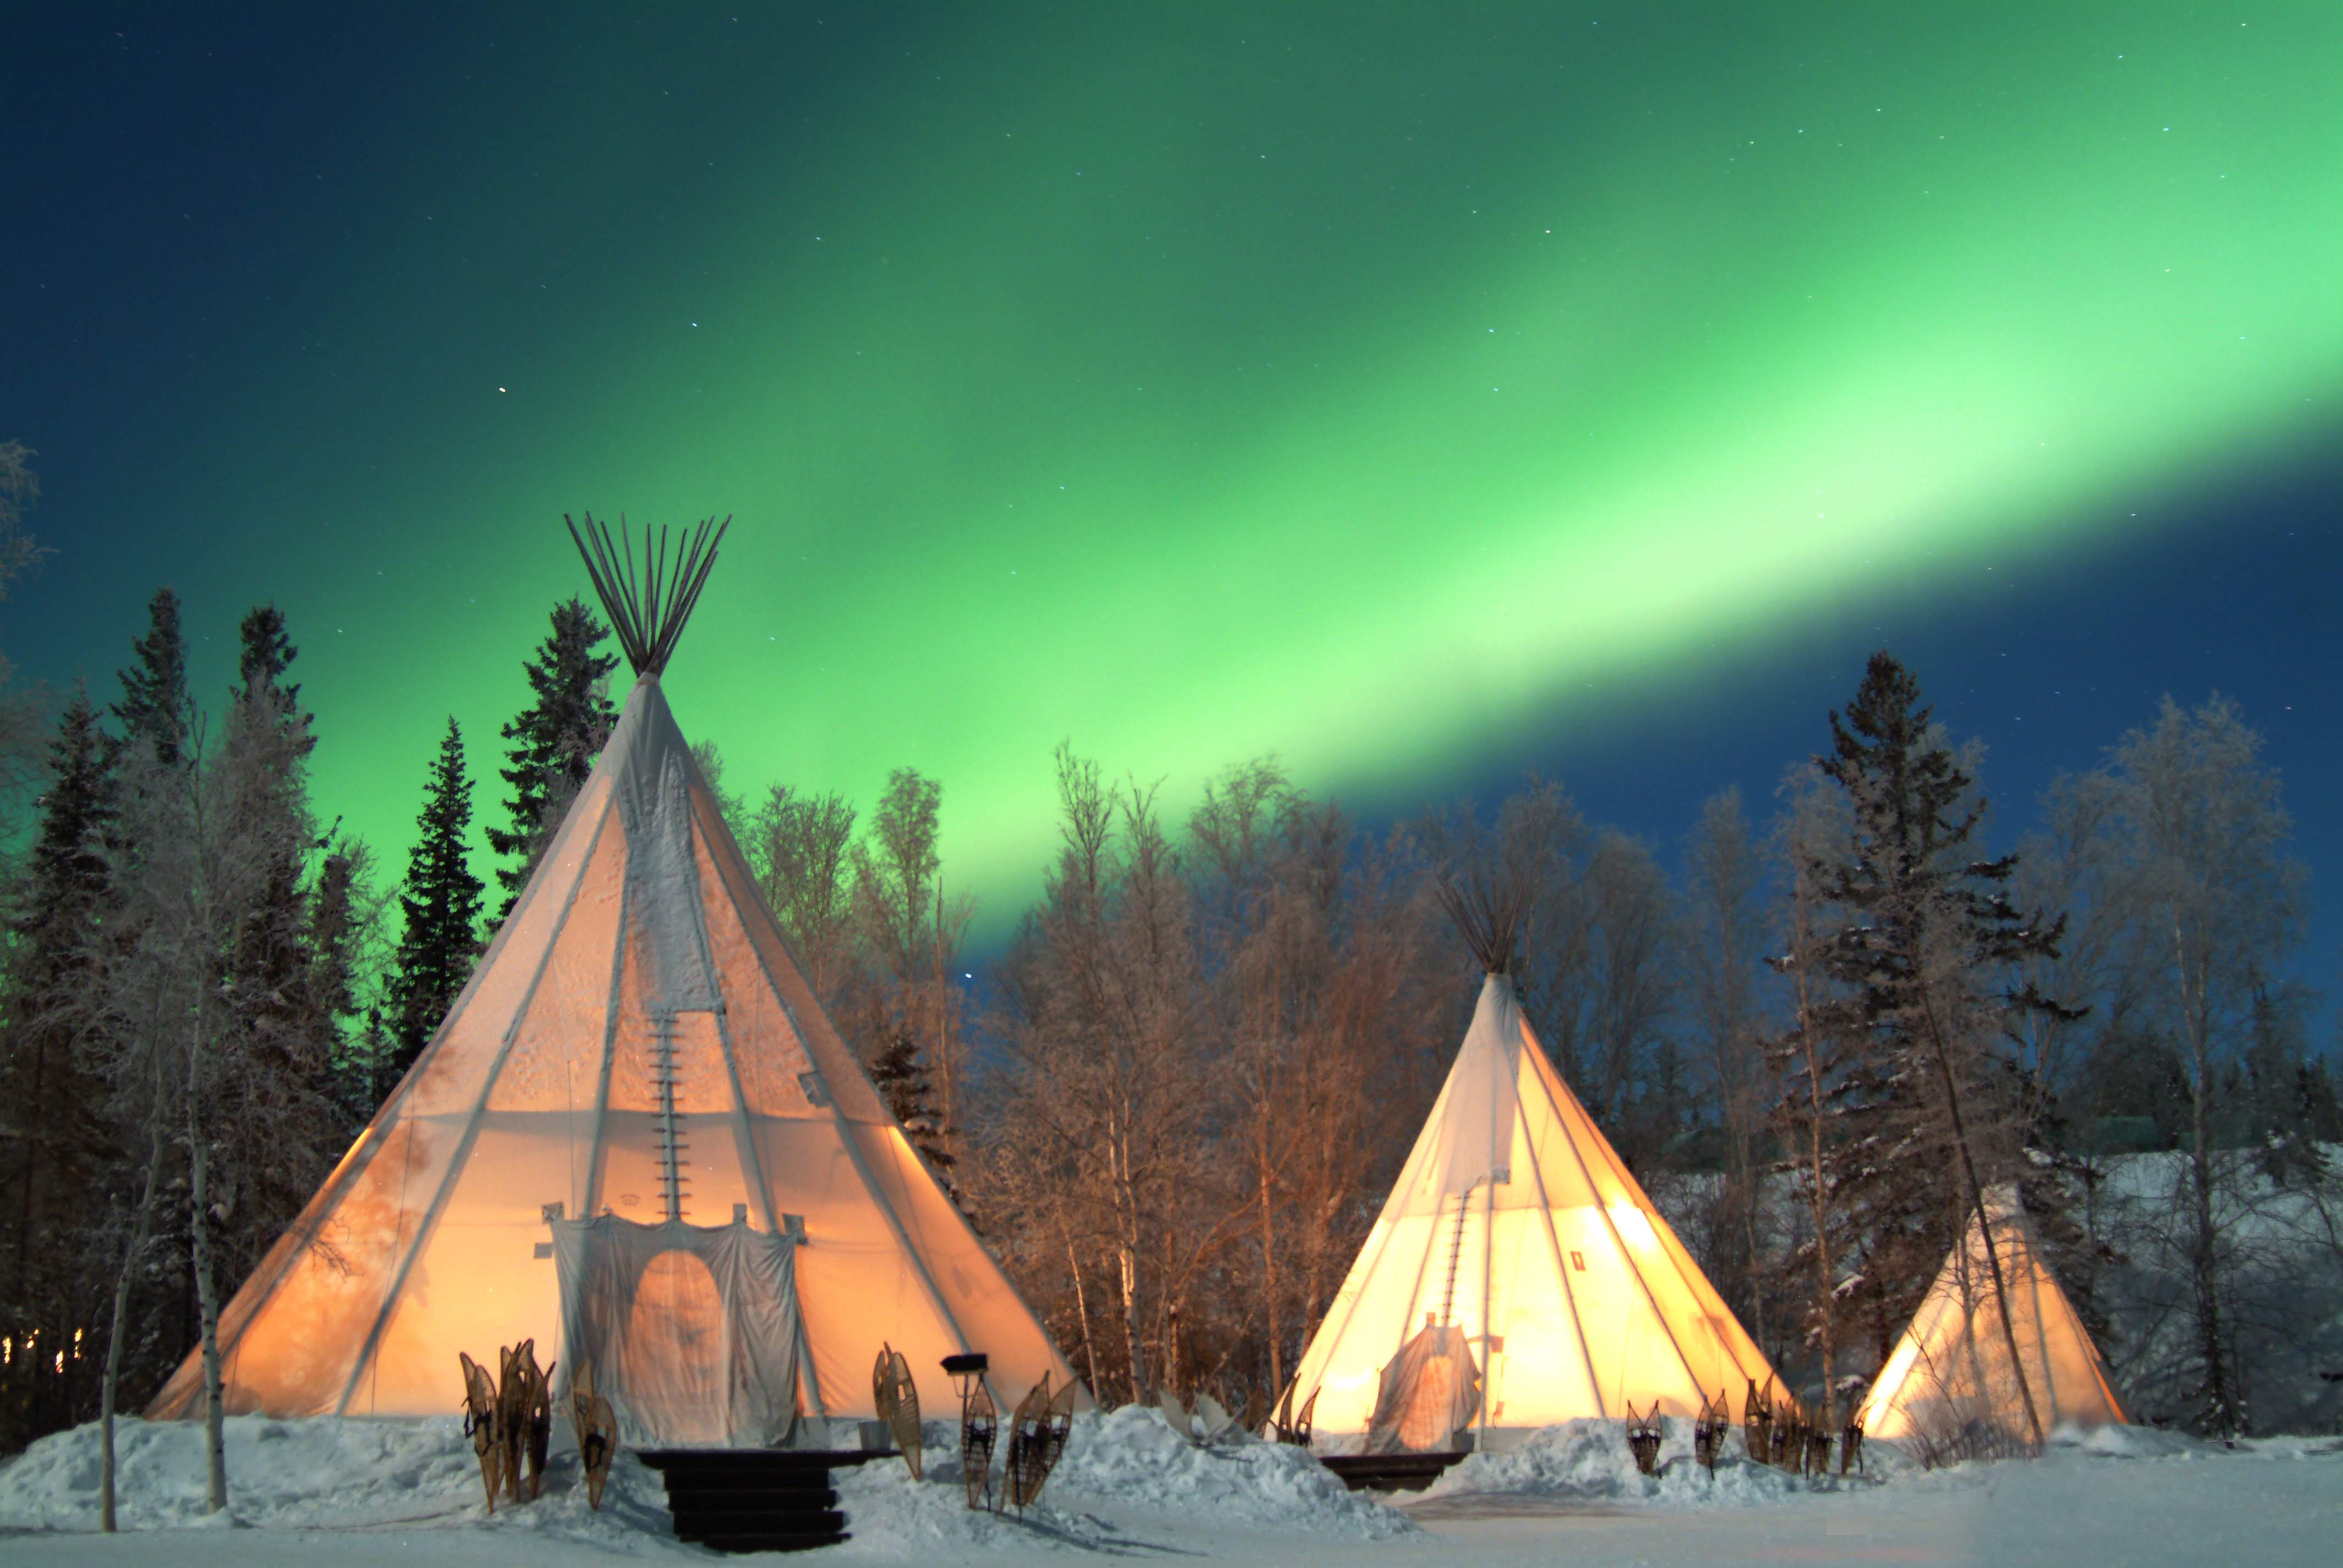 The Northern Lights by the Numbers - Spectacular NWT